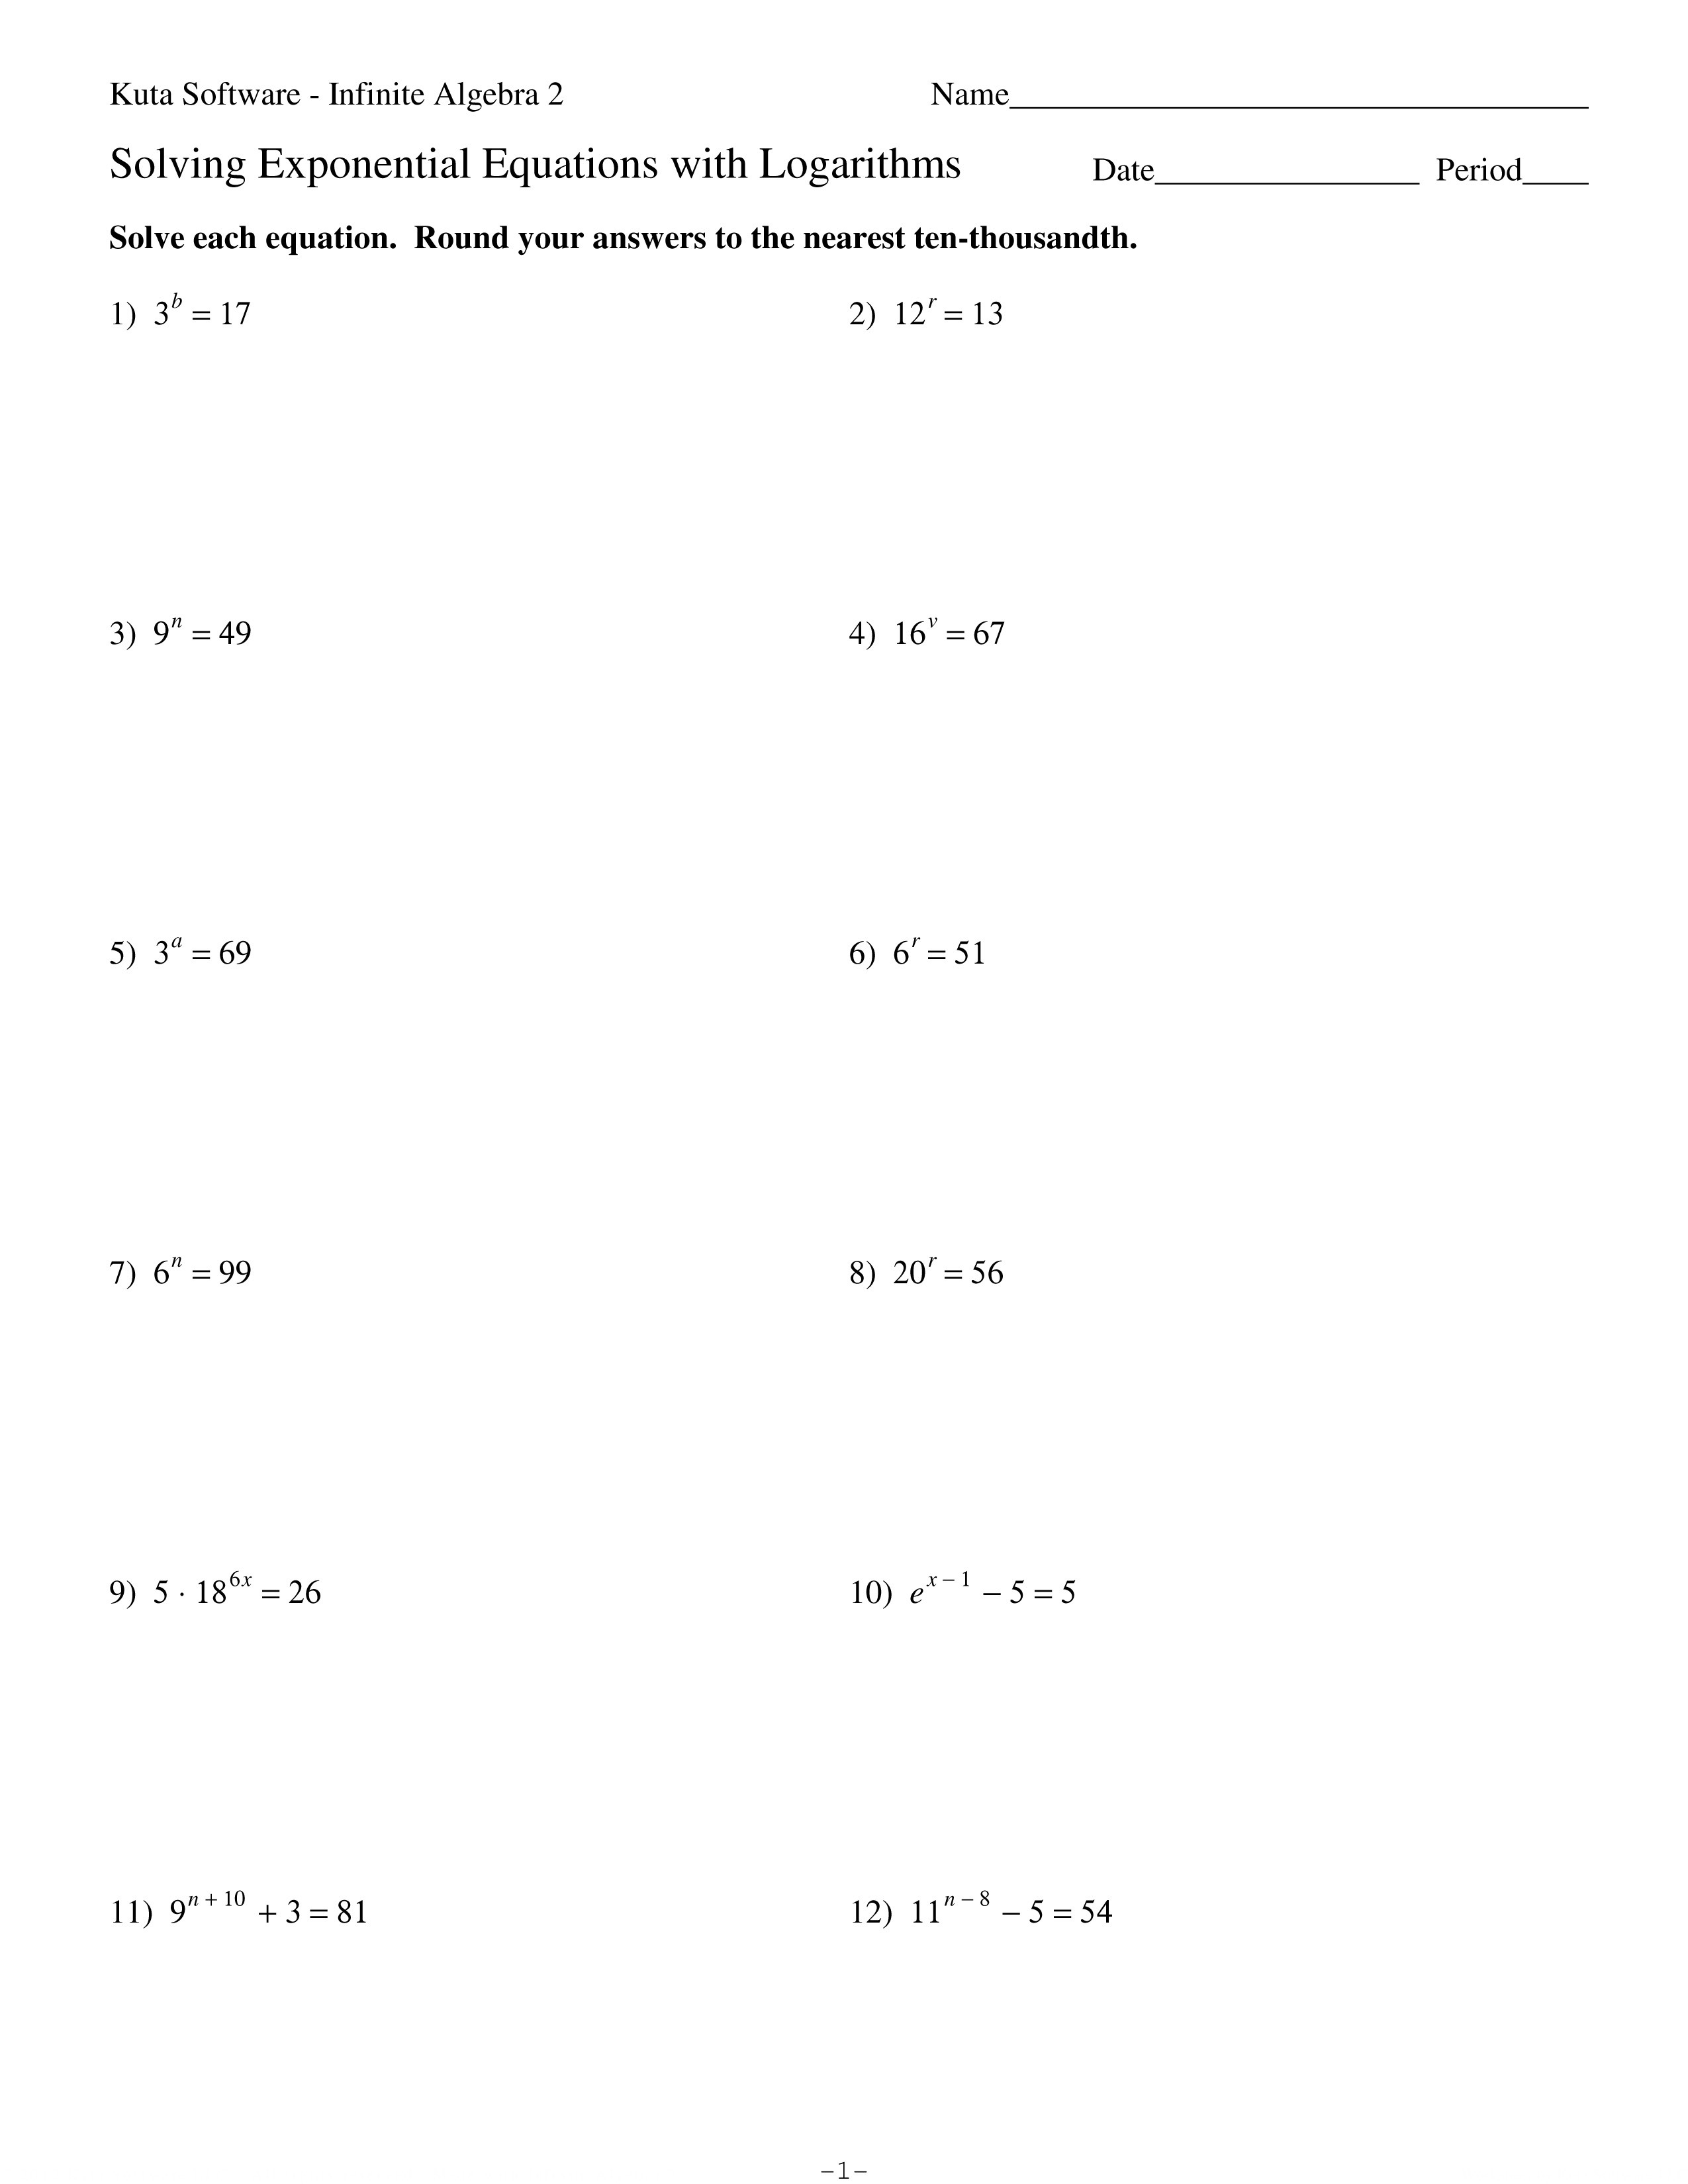 Solving Exponential Equations Worksheet With Answers db excel com